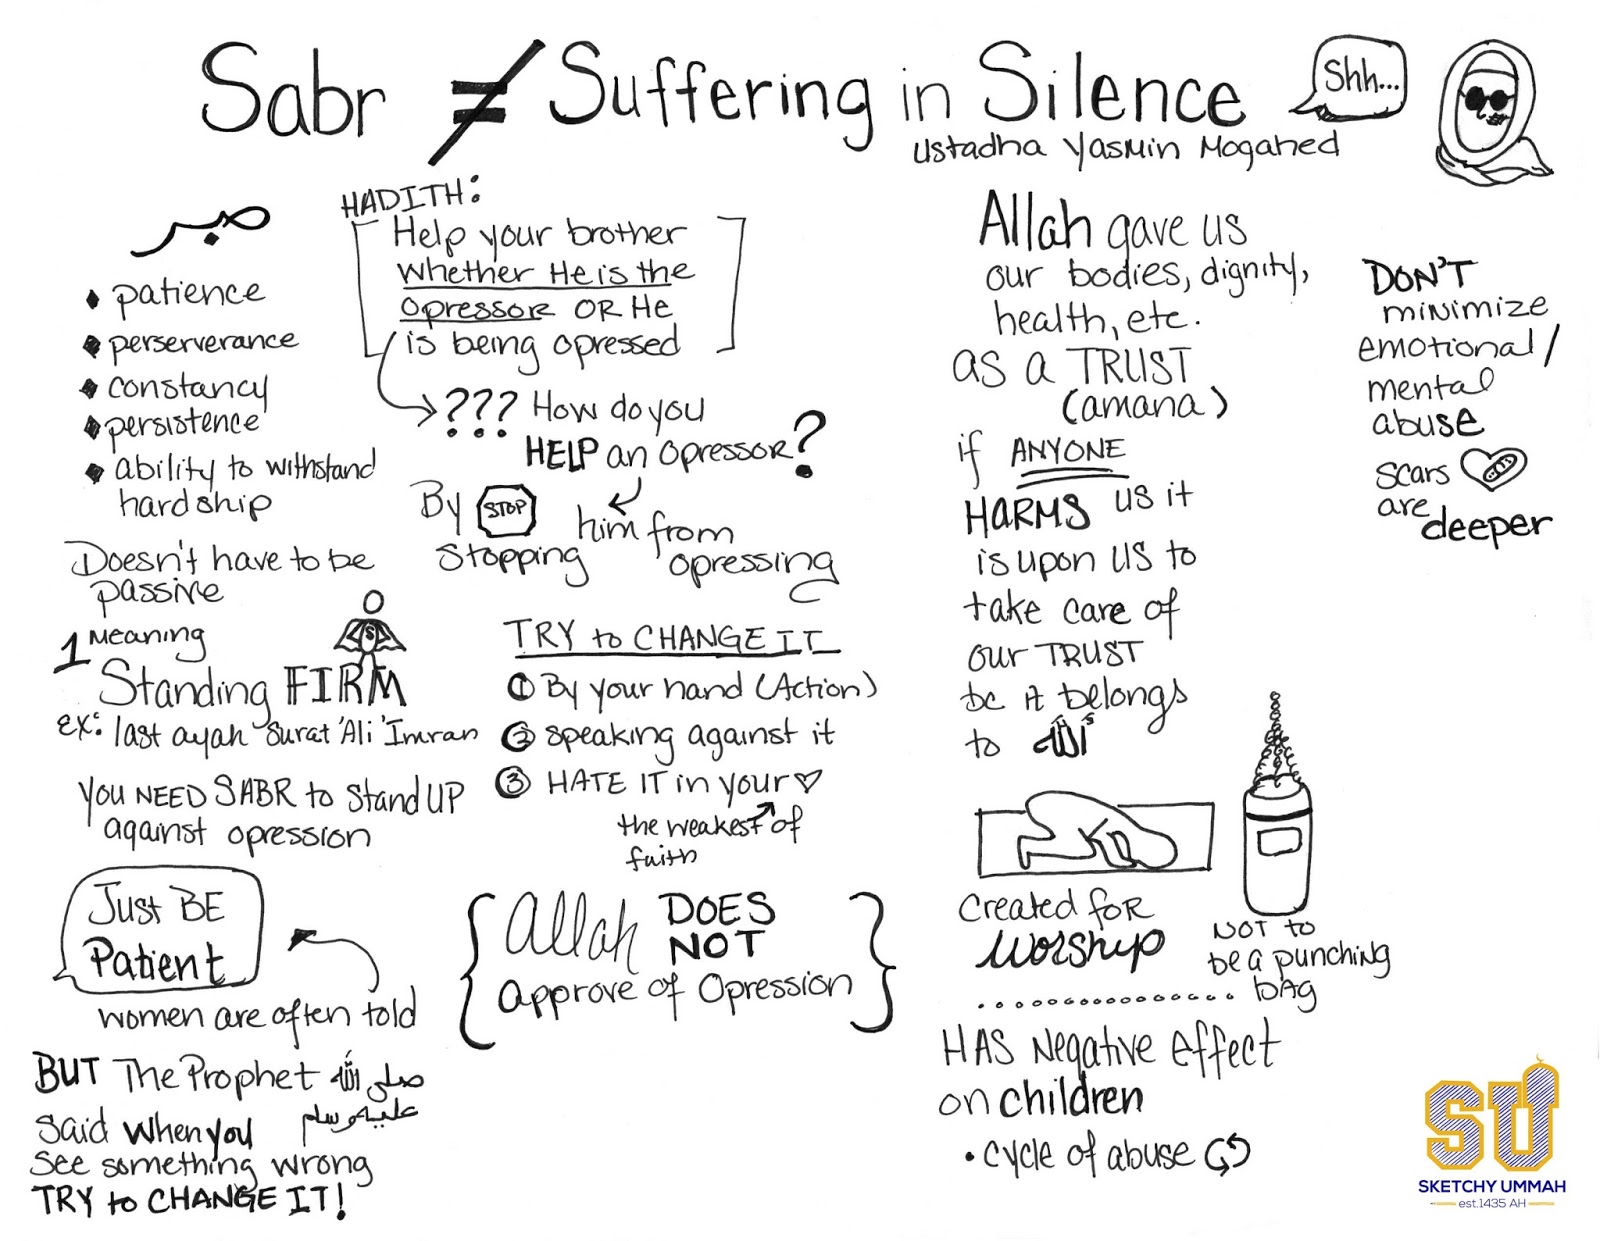 Sabr is not Suffering in Silence  #2